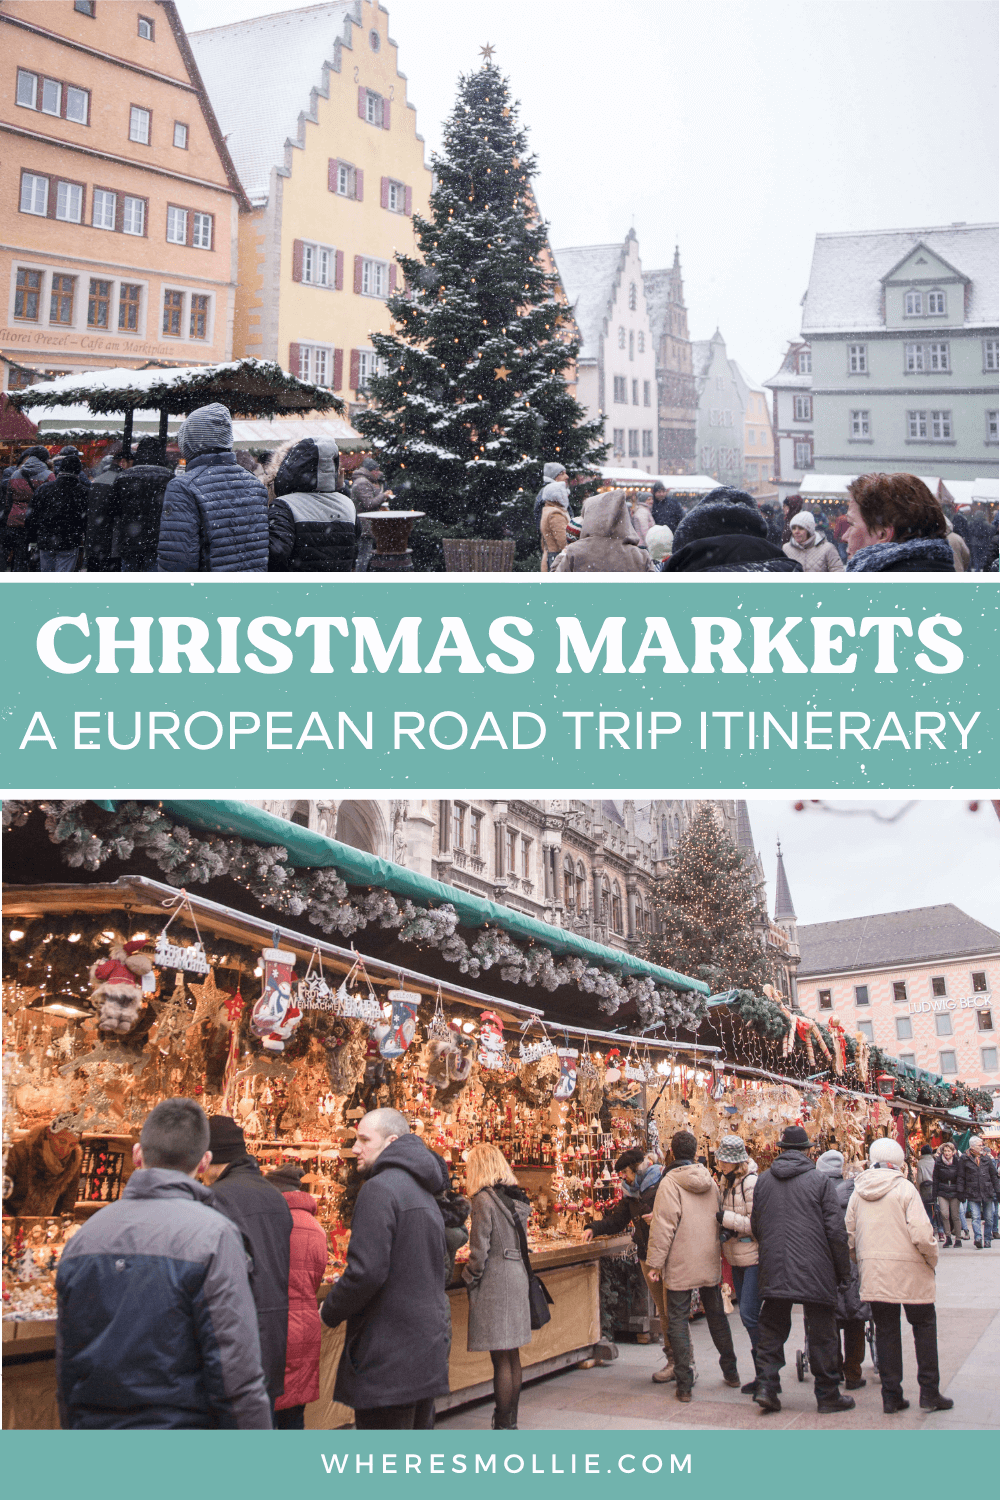 The ultimate Christmas market road trip through Europe